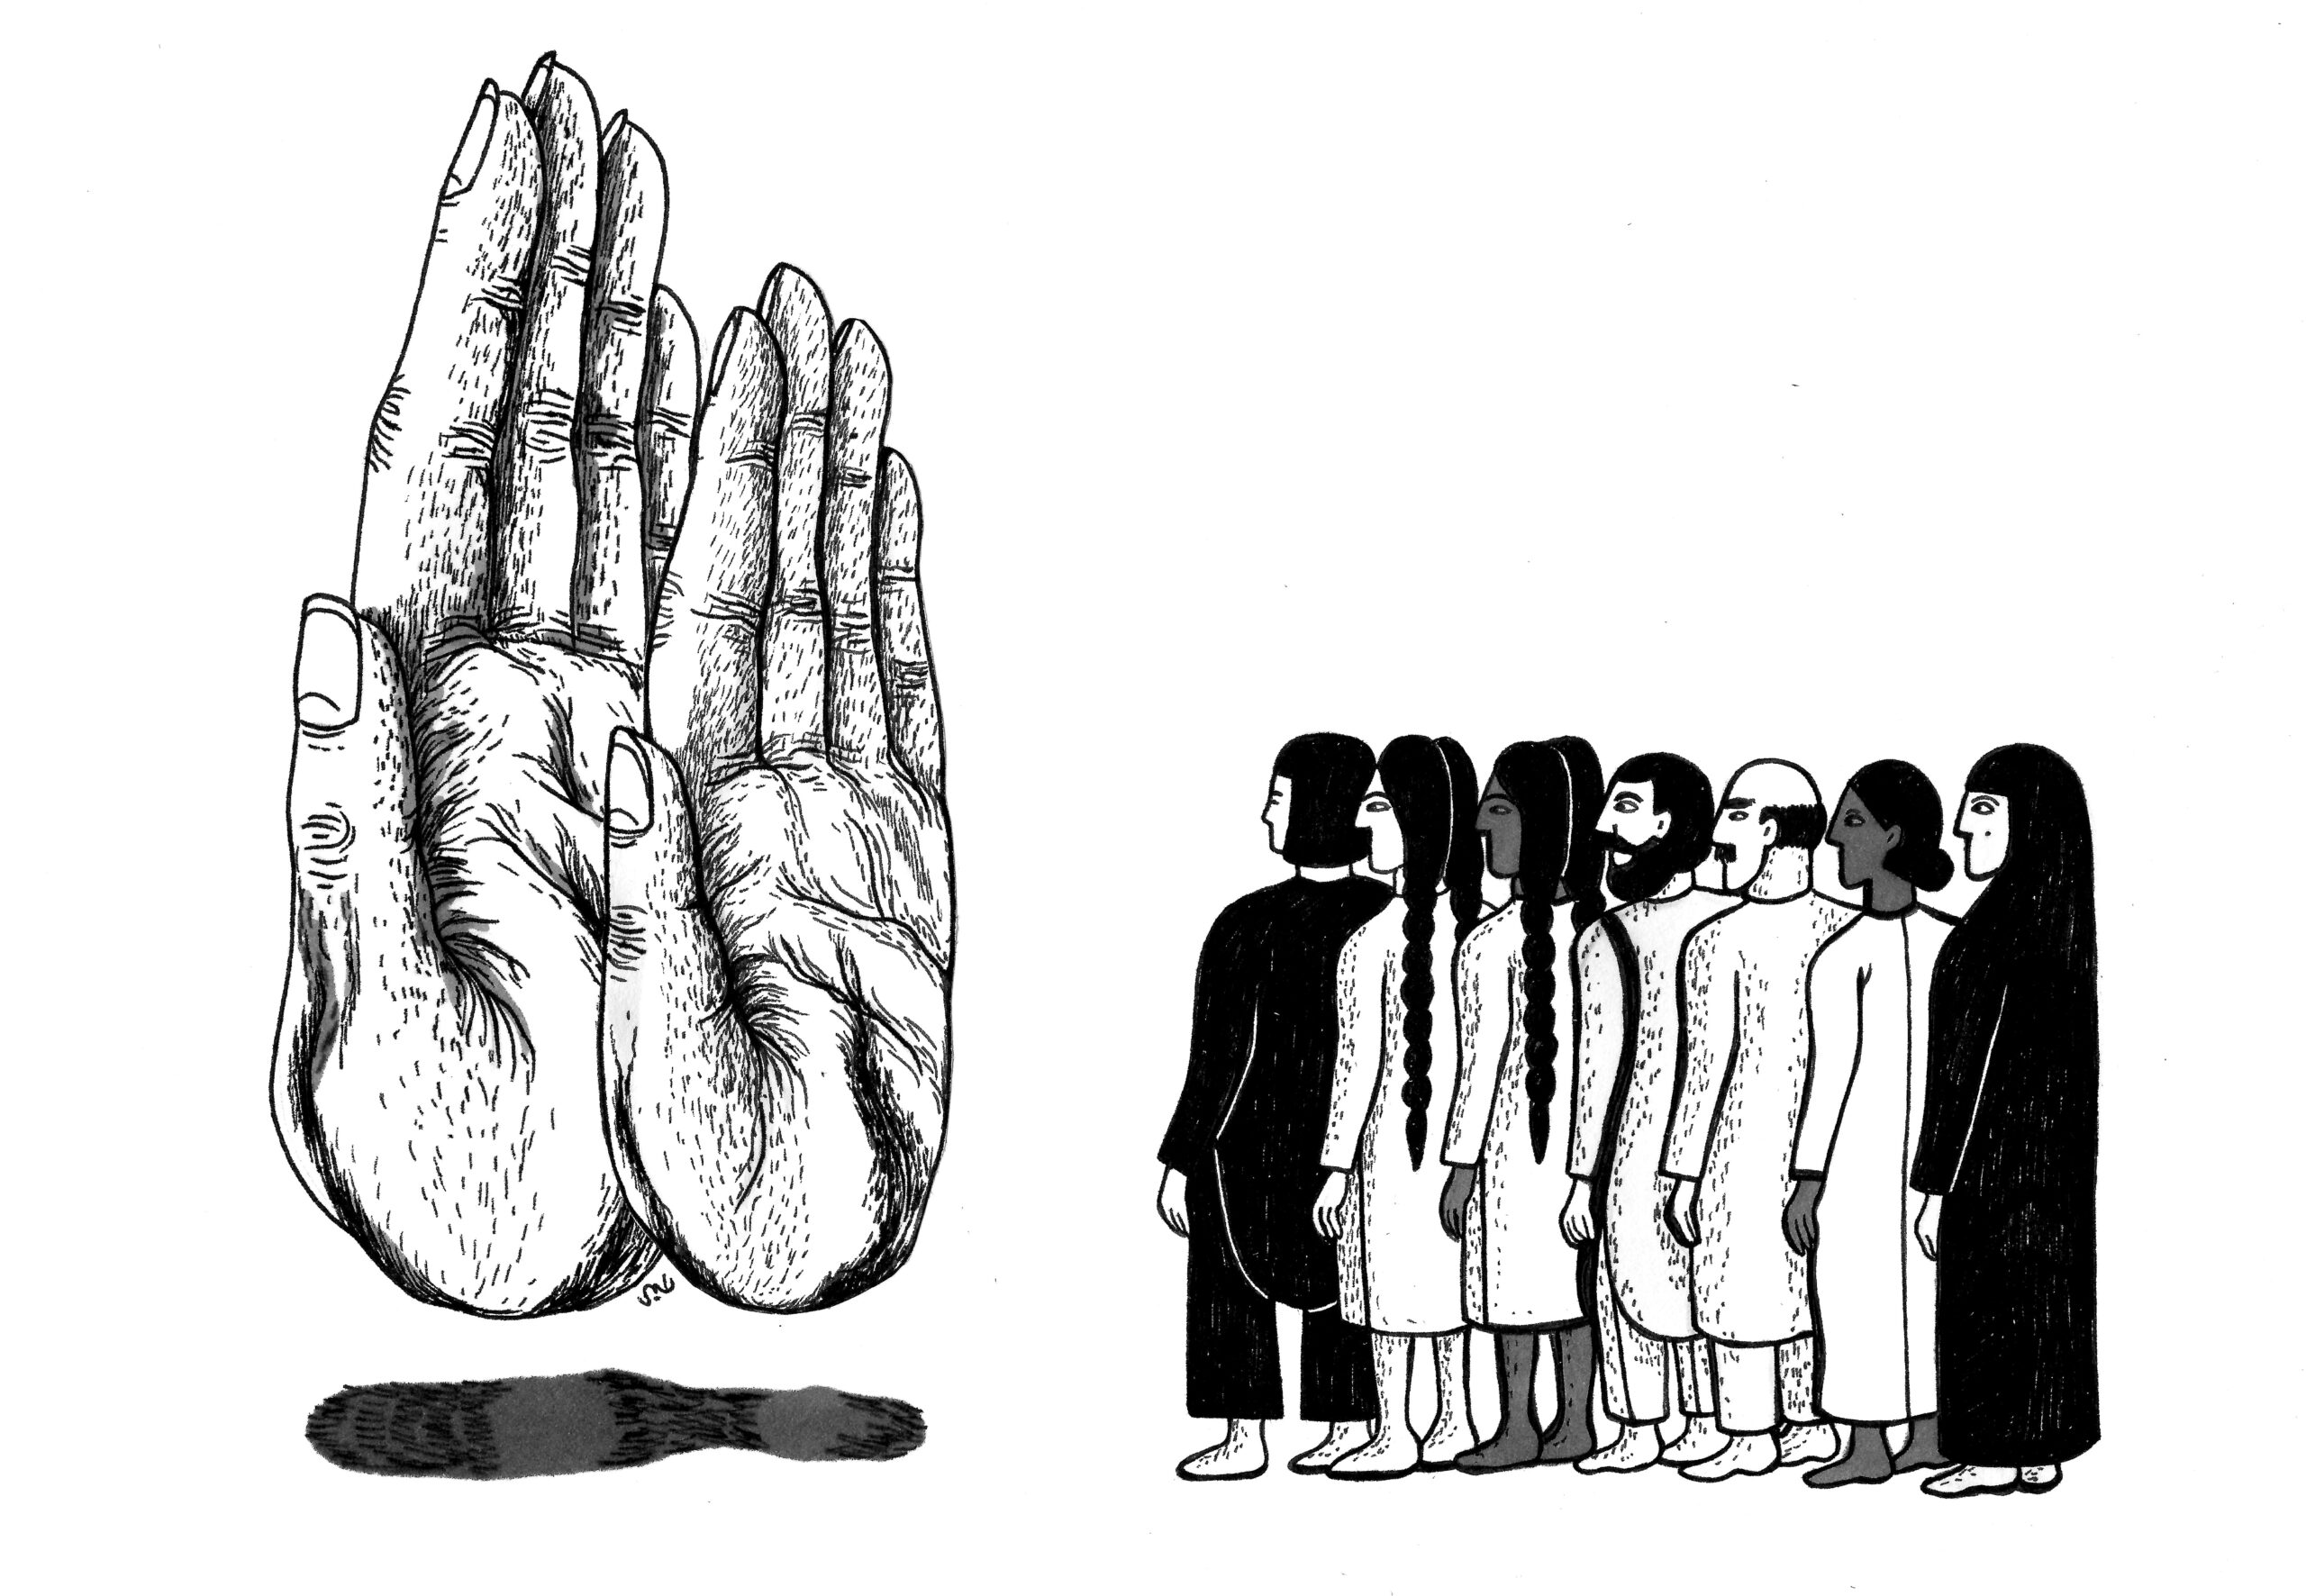 Two giant hands block the way for a group of people with various skin colors, genders and hair styles.